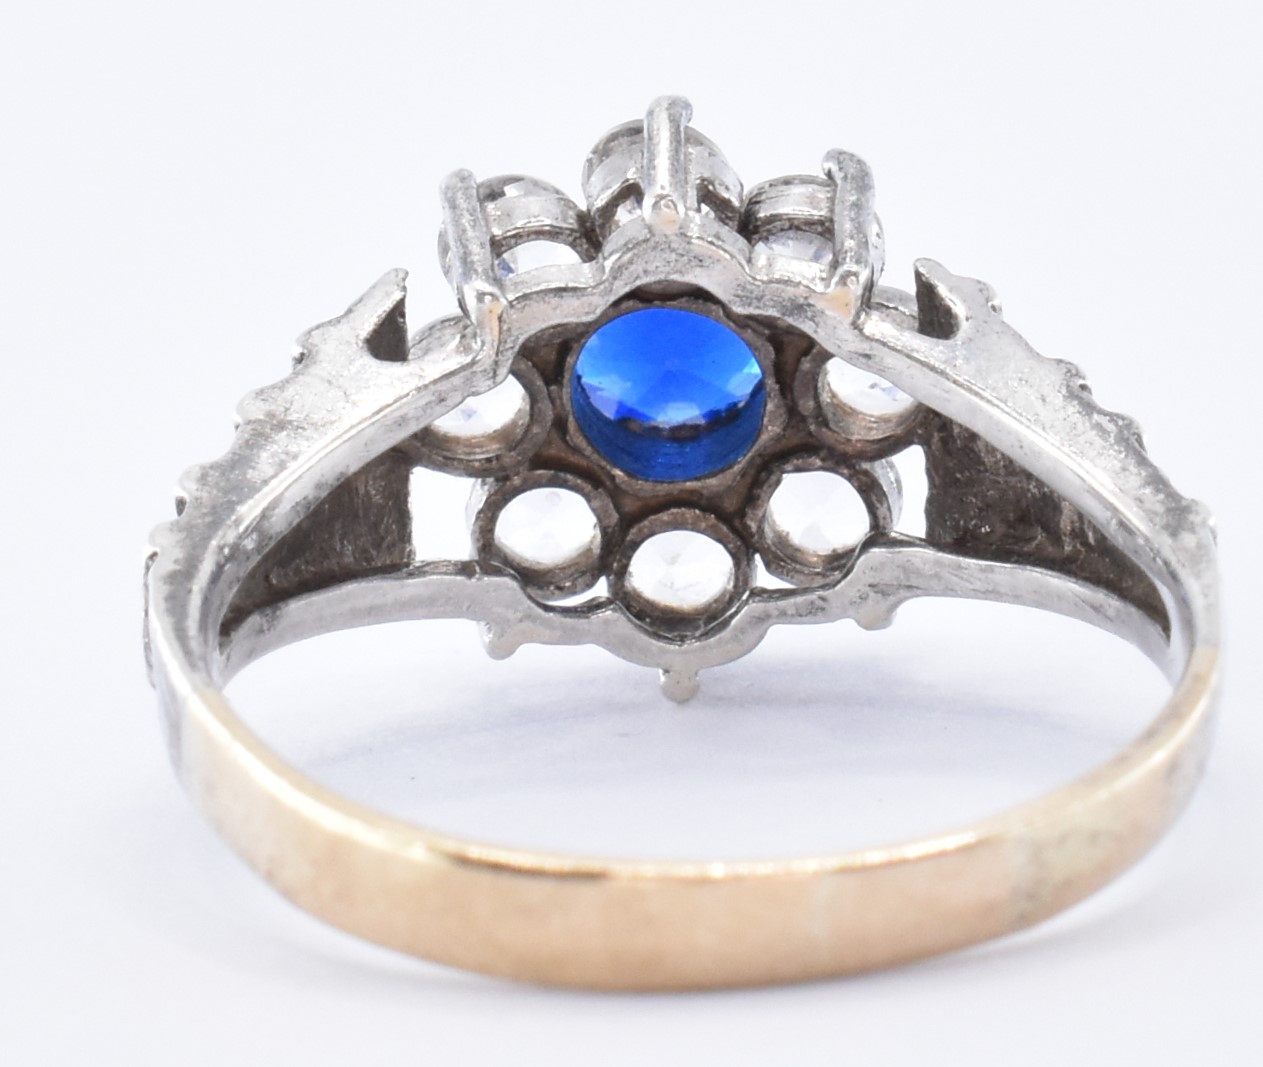 9CT GOLD & SILVER RING WITH 9CT BLUE STONE PENDANT - Image 4 of 8